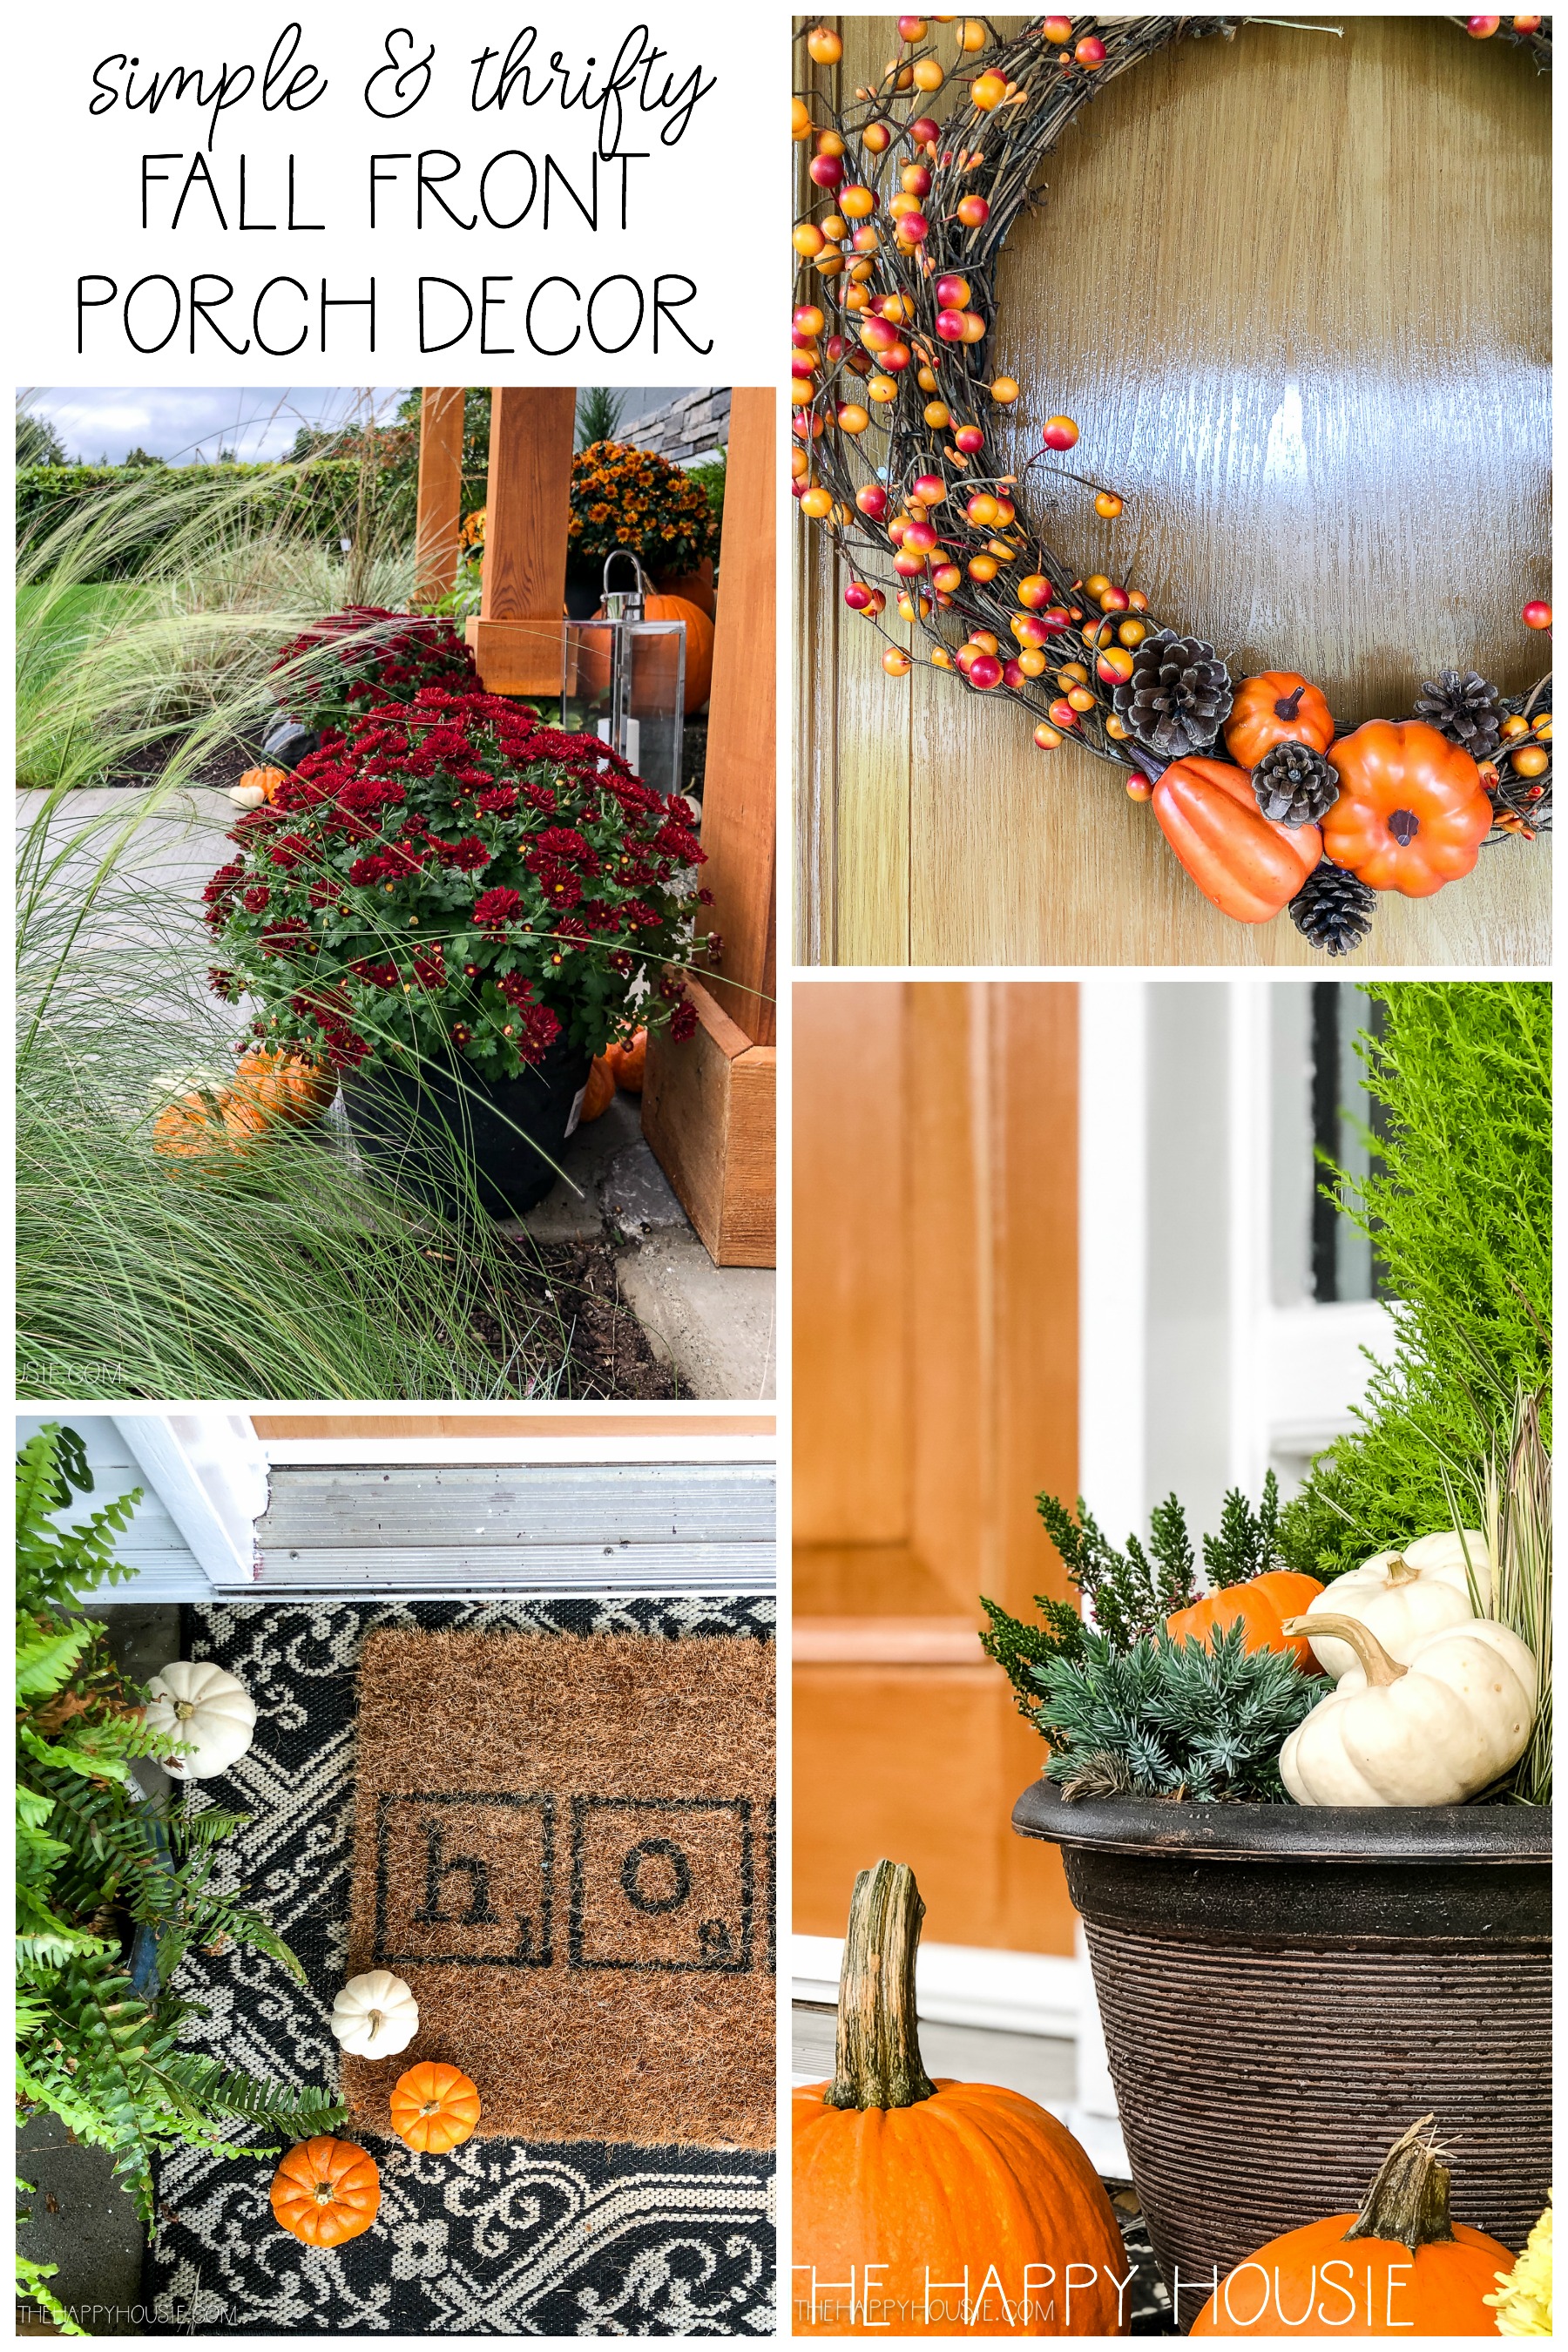 Simple & Thrifty Fall Front Porch Decor poster.